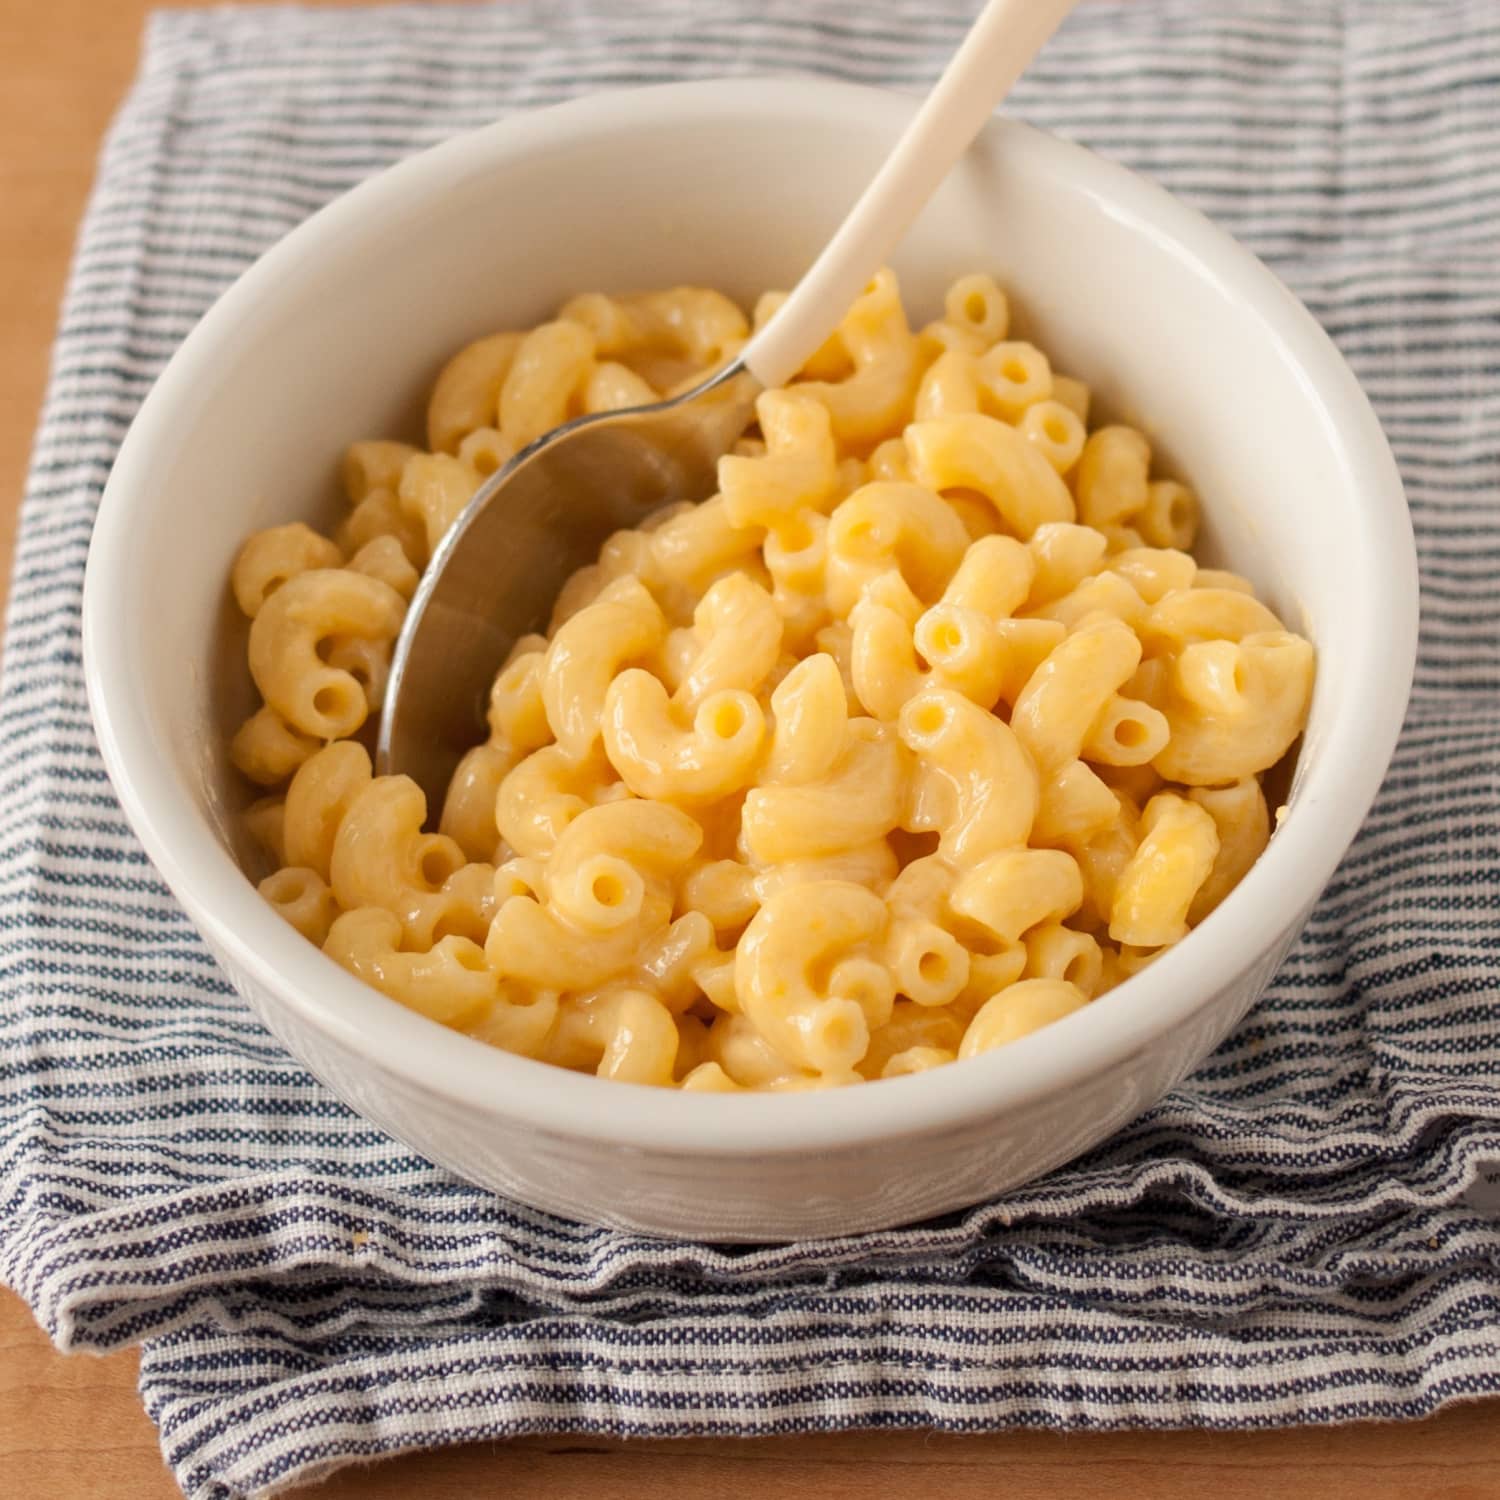 Quick Preparation of Macaroni and Cheese in a Cup